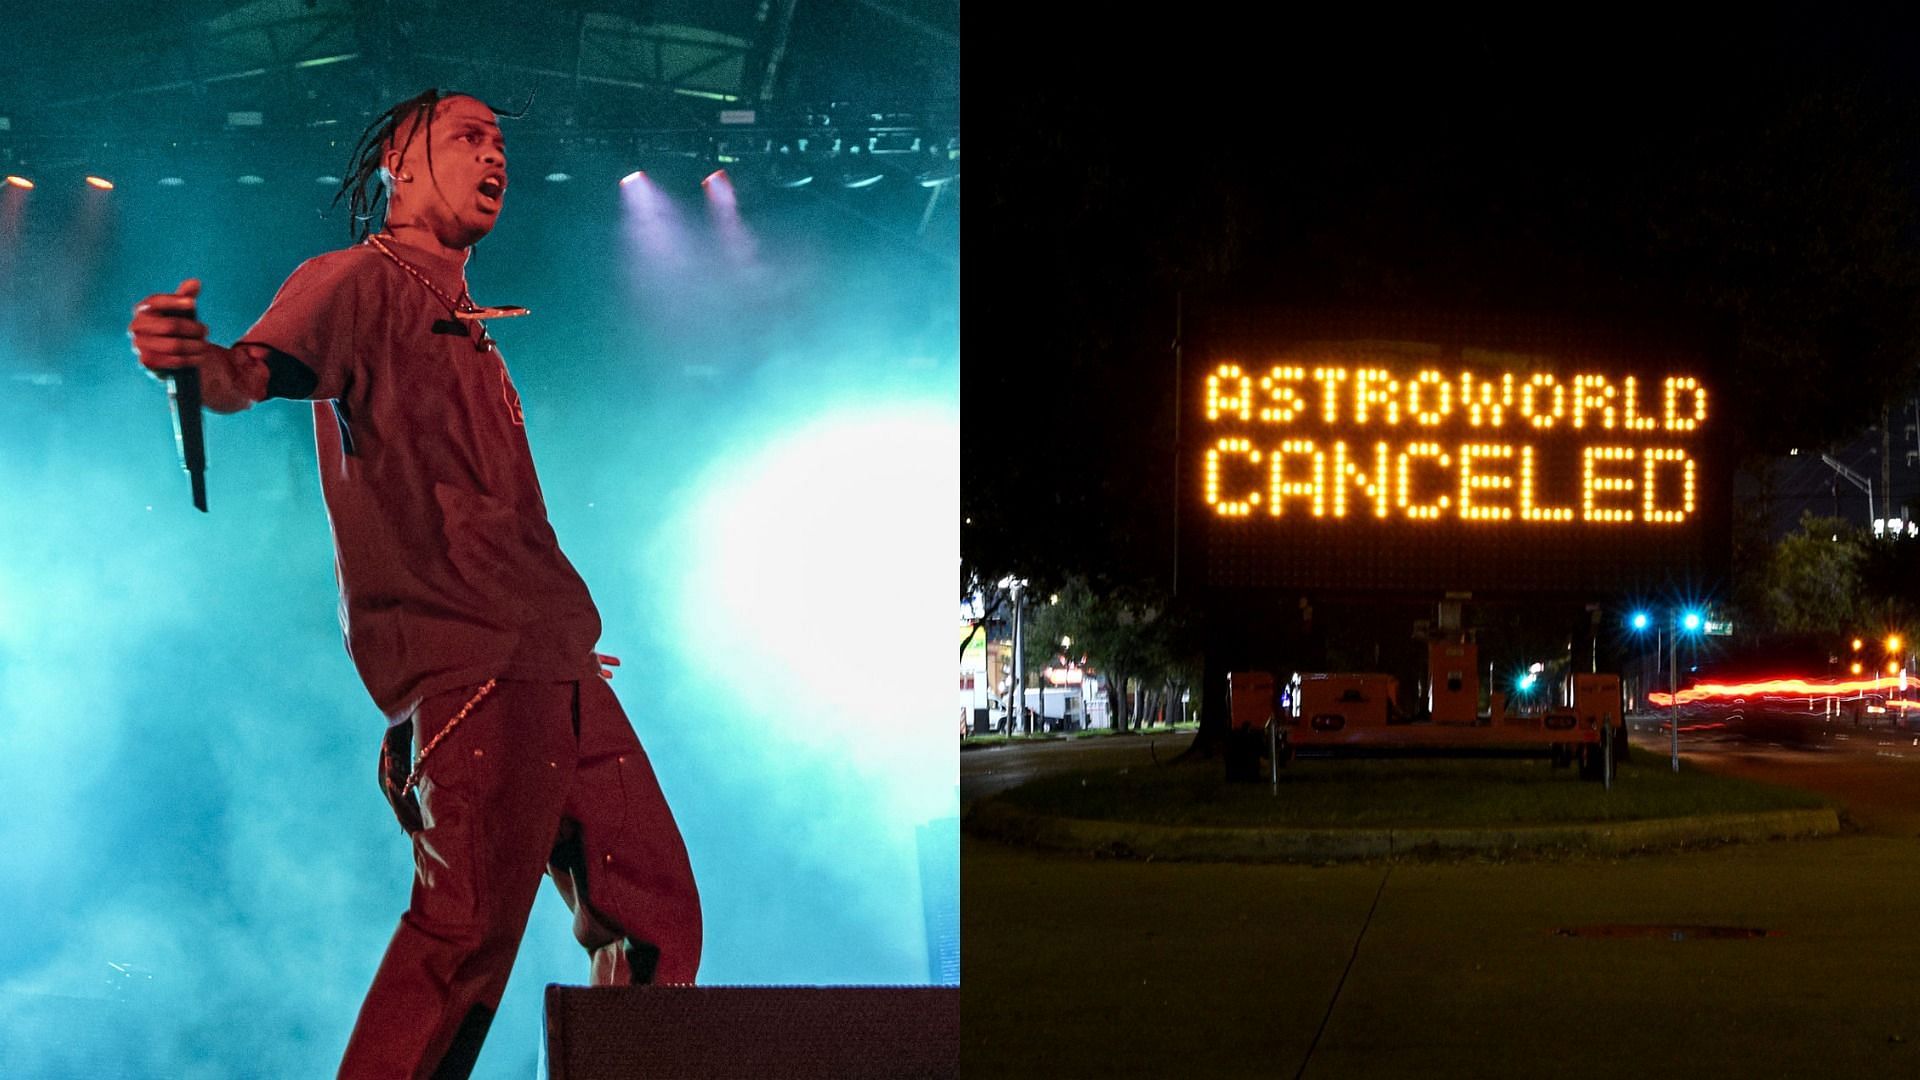 At least two lawsuits have been filed against Travis Scott and the Astroworld organizers for the mass stampede at the event (Image via Getty Images)